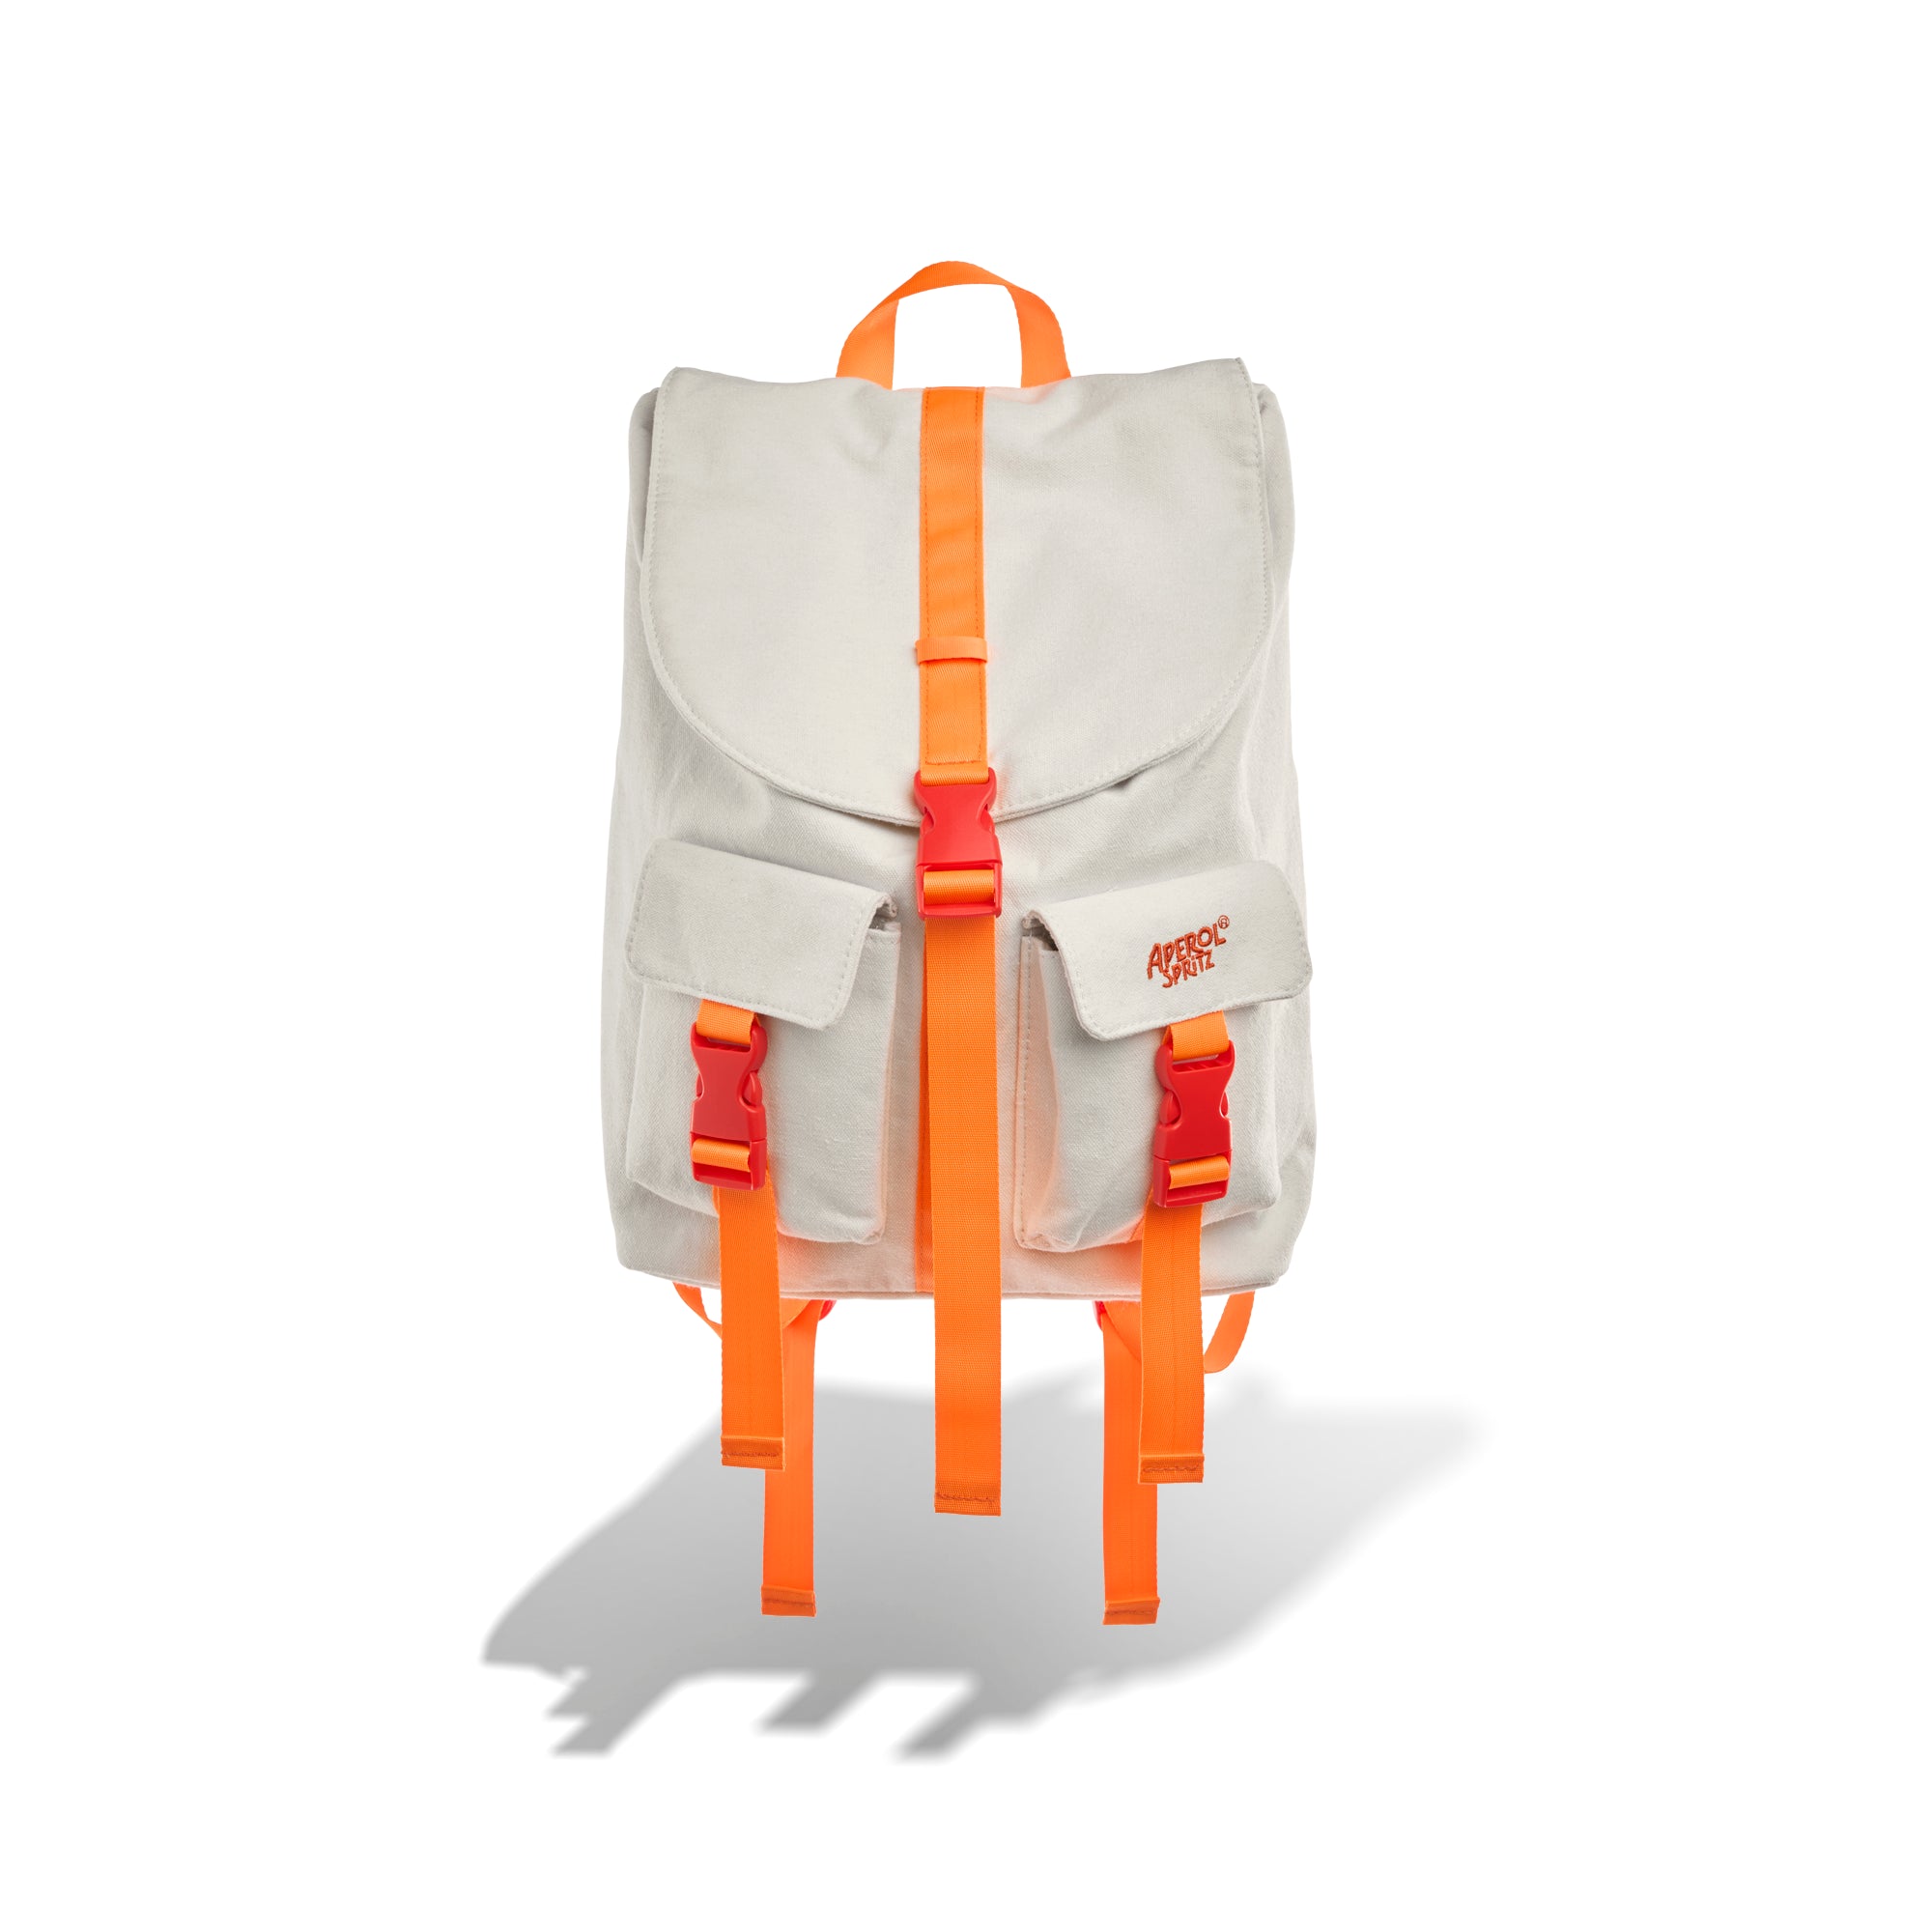 APEROL SPRITZ BACKPACK WITH POCKETS